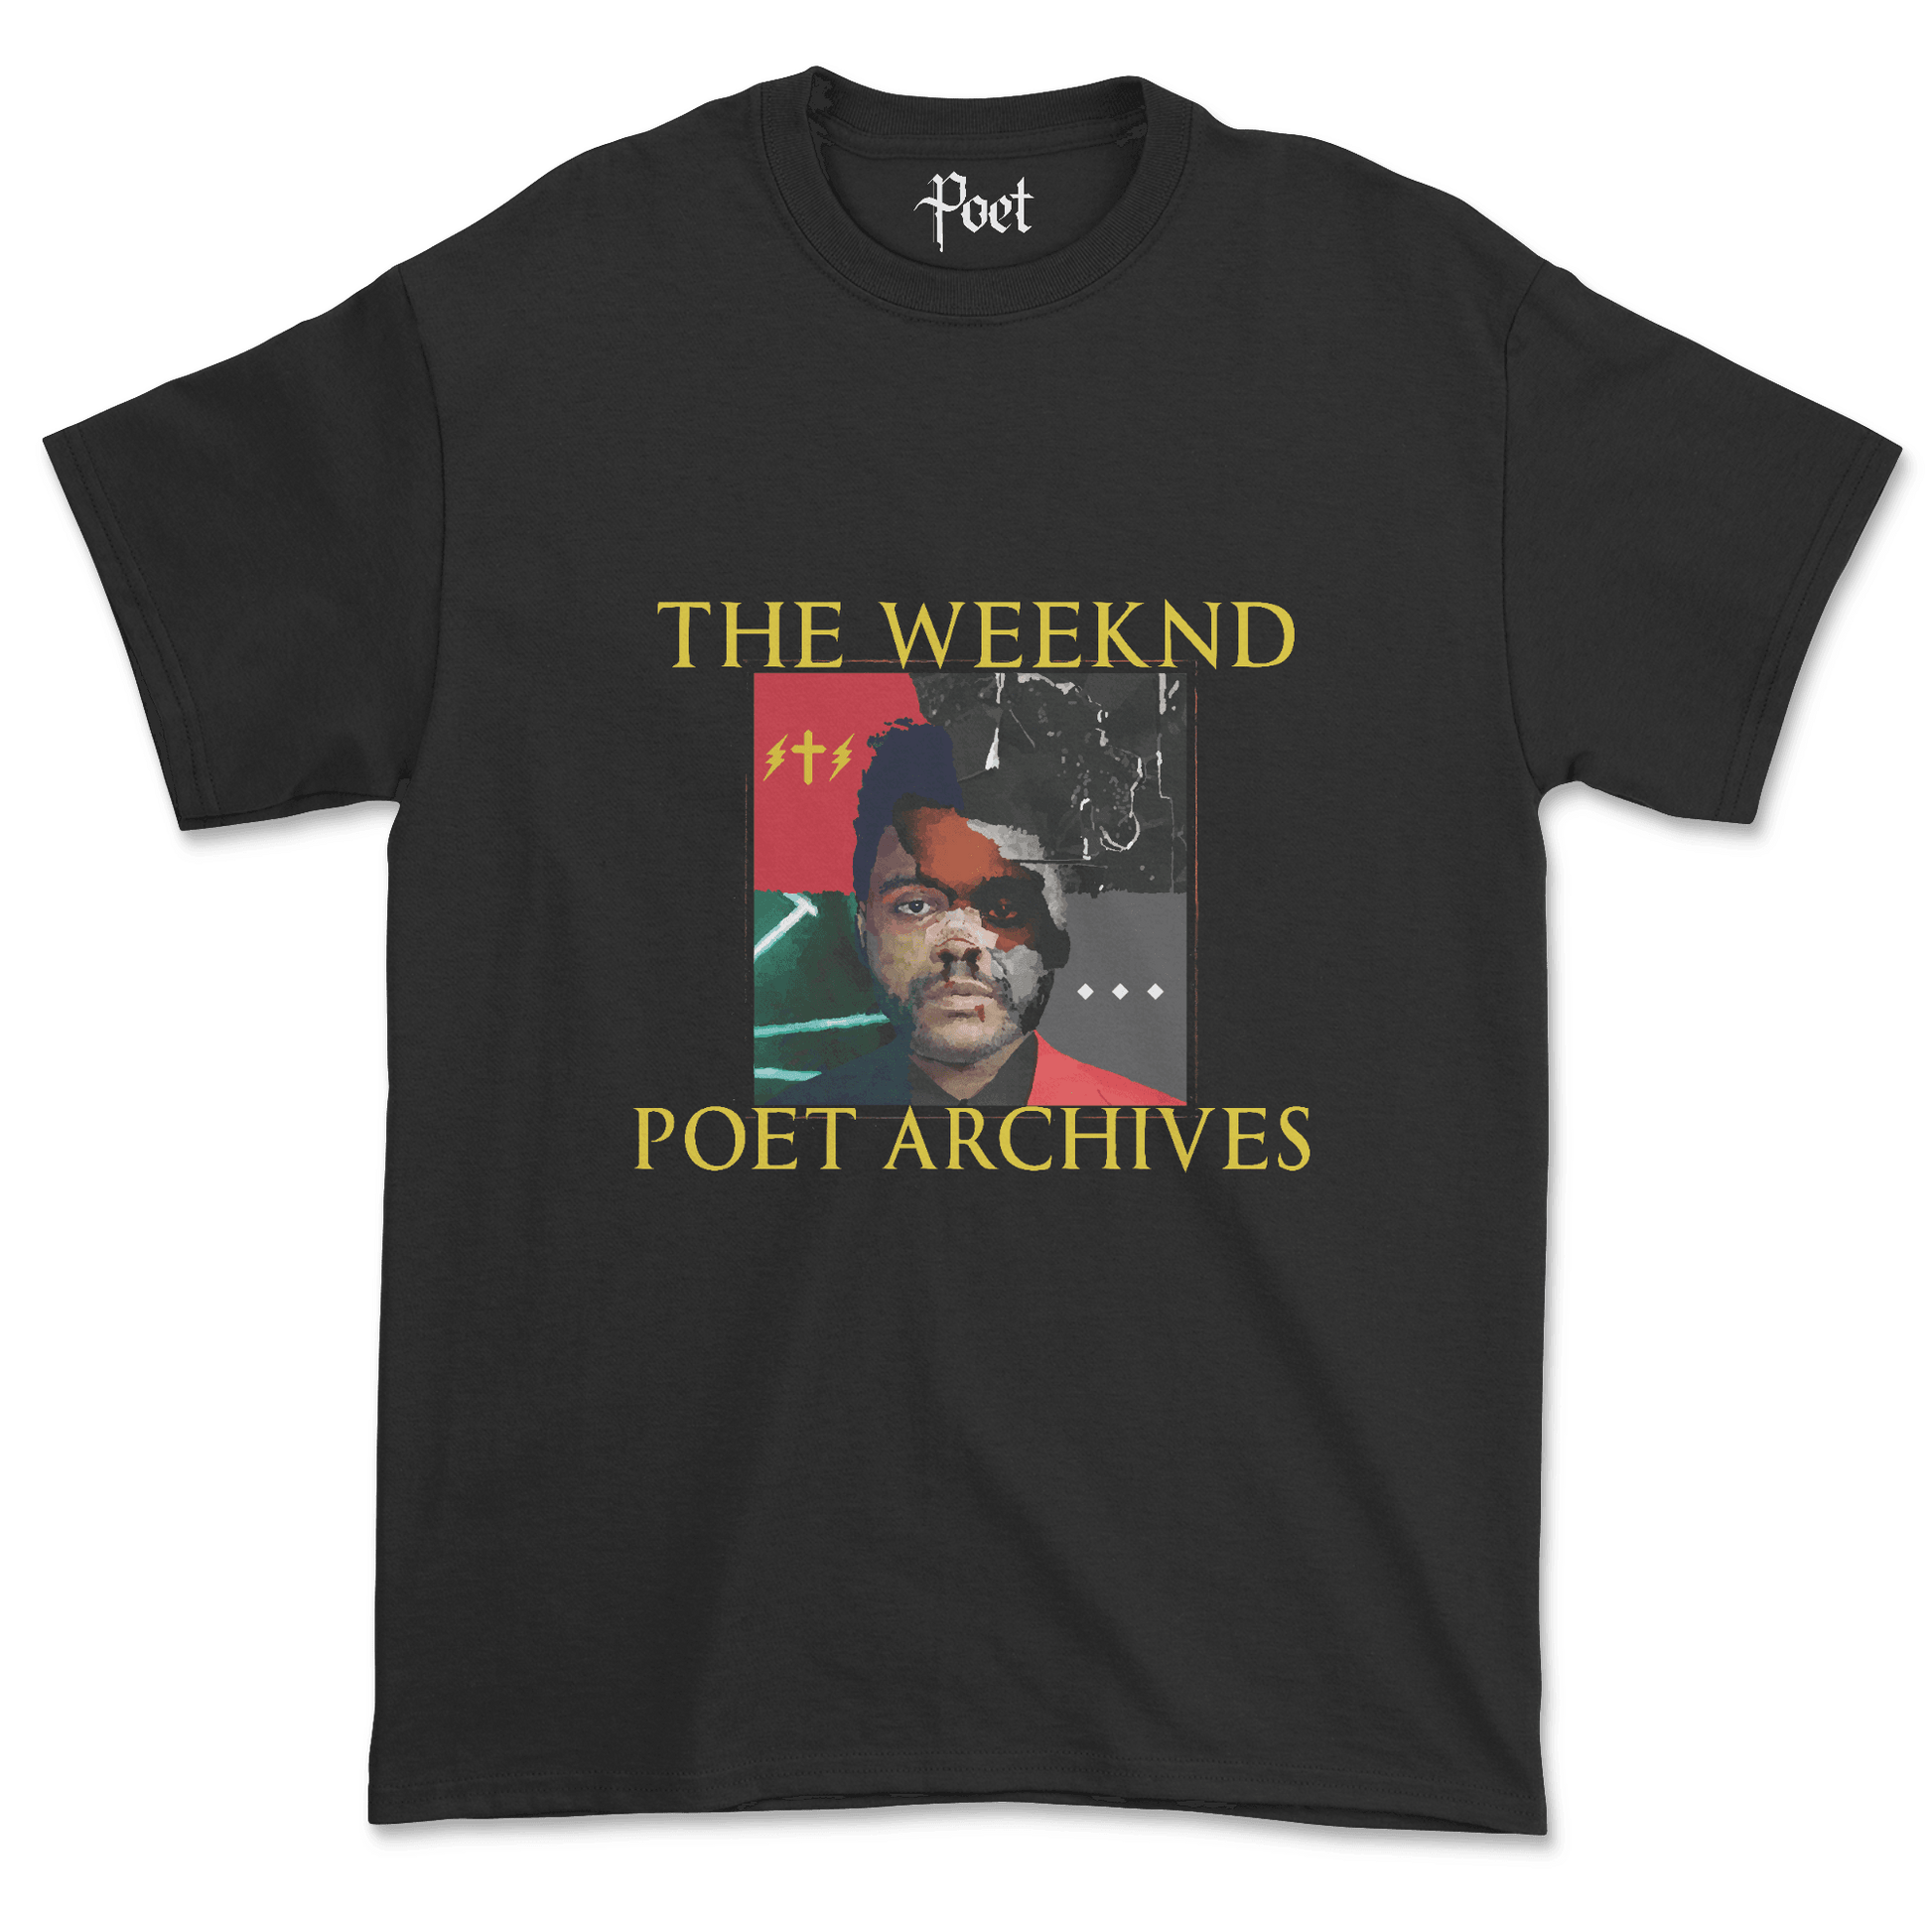 The Weeknd T-Shirt - Poet Archives